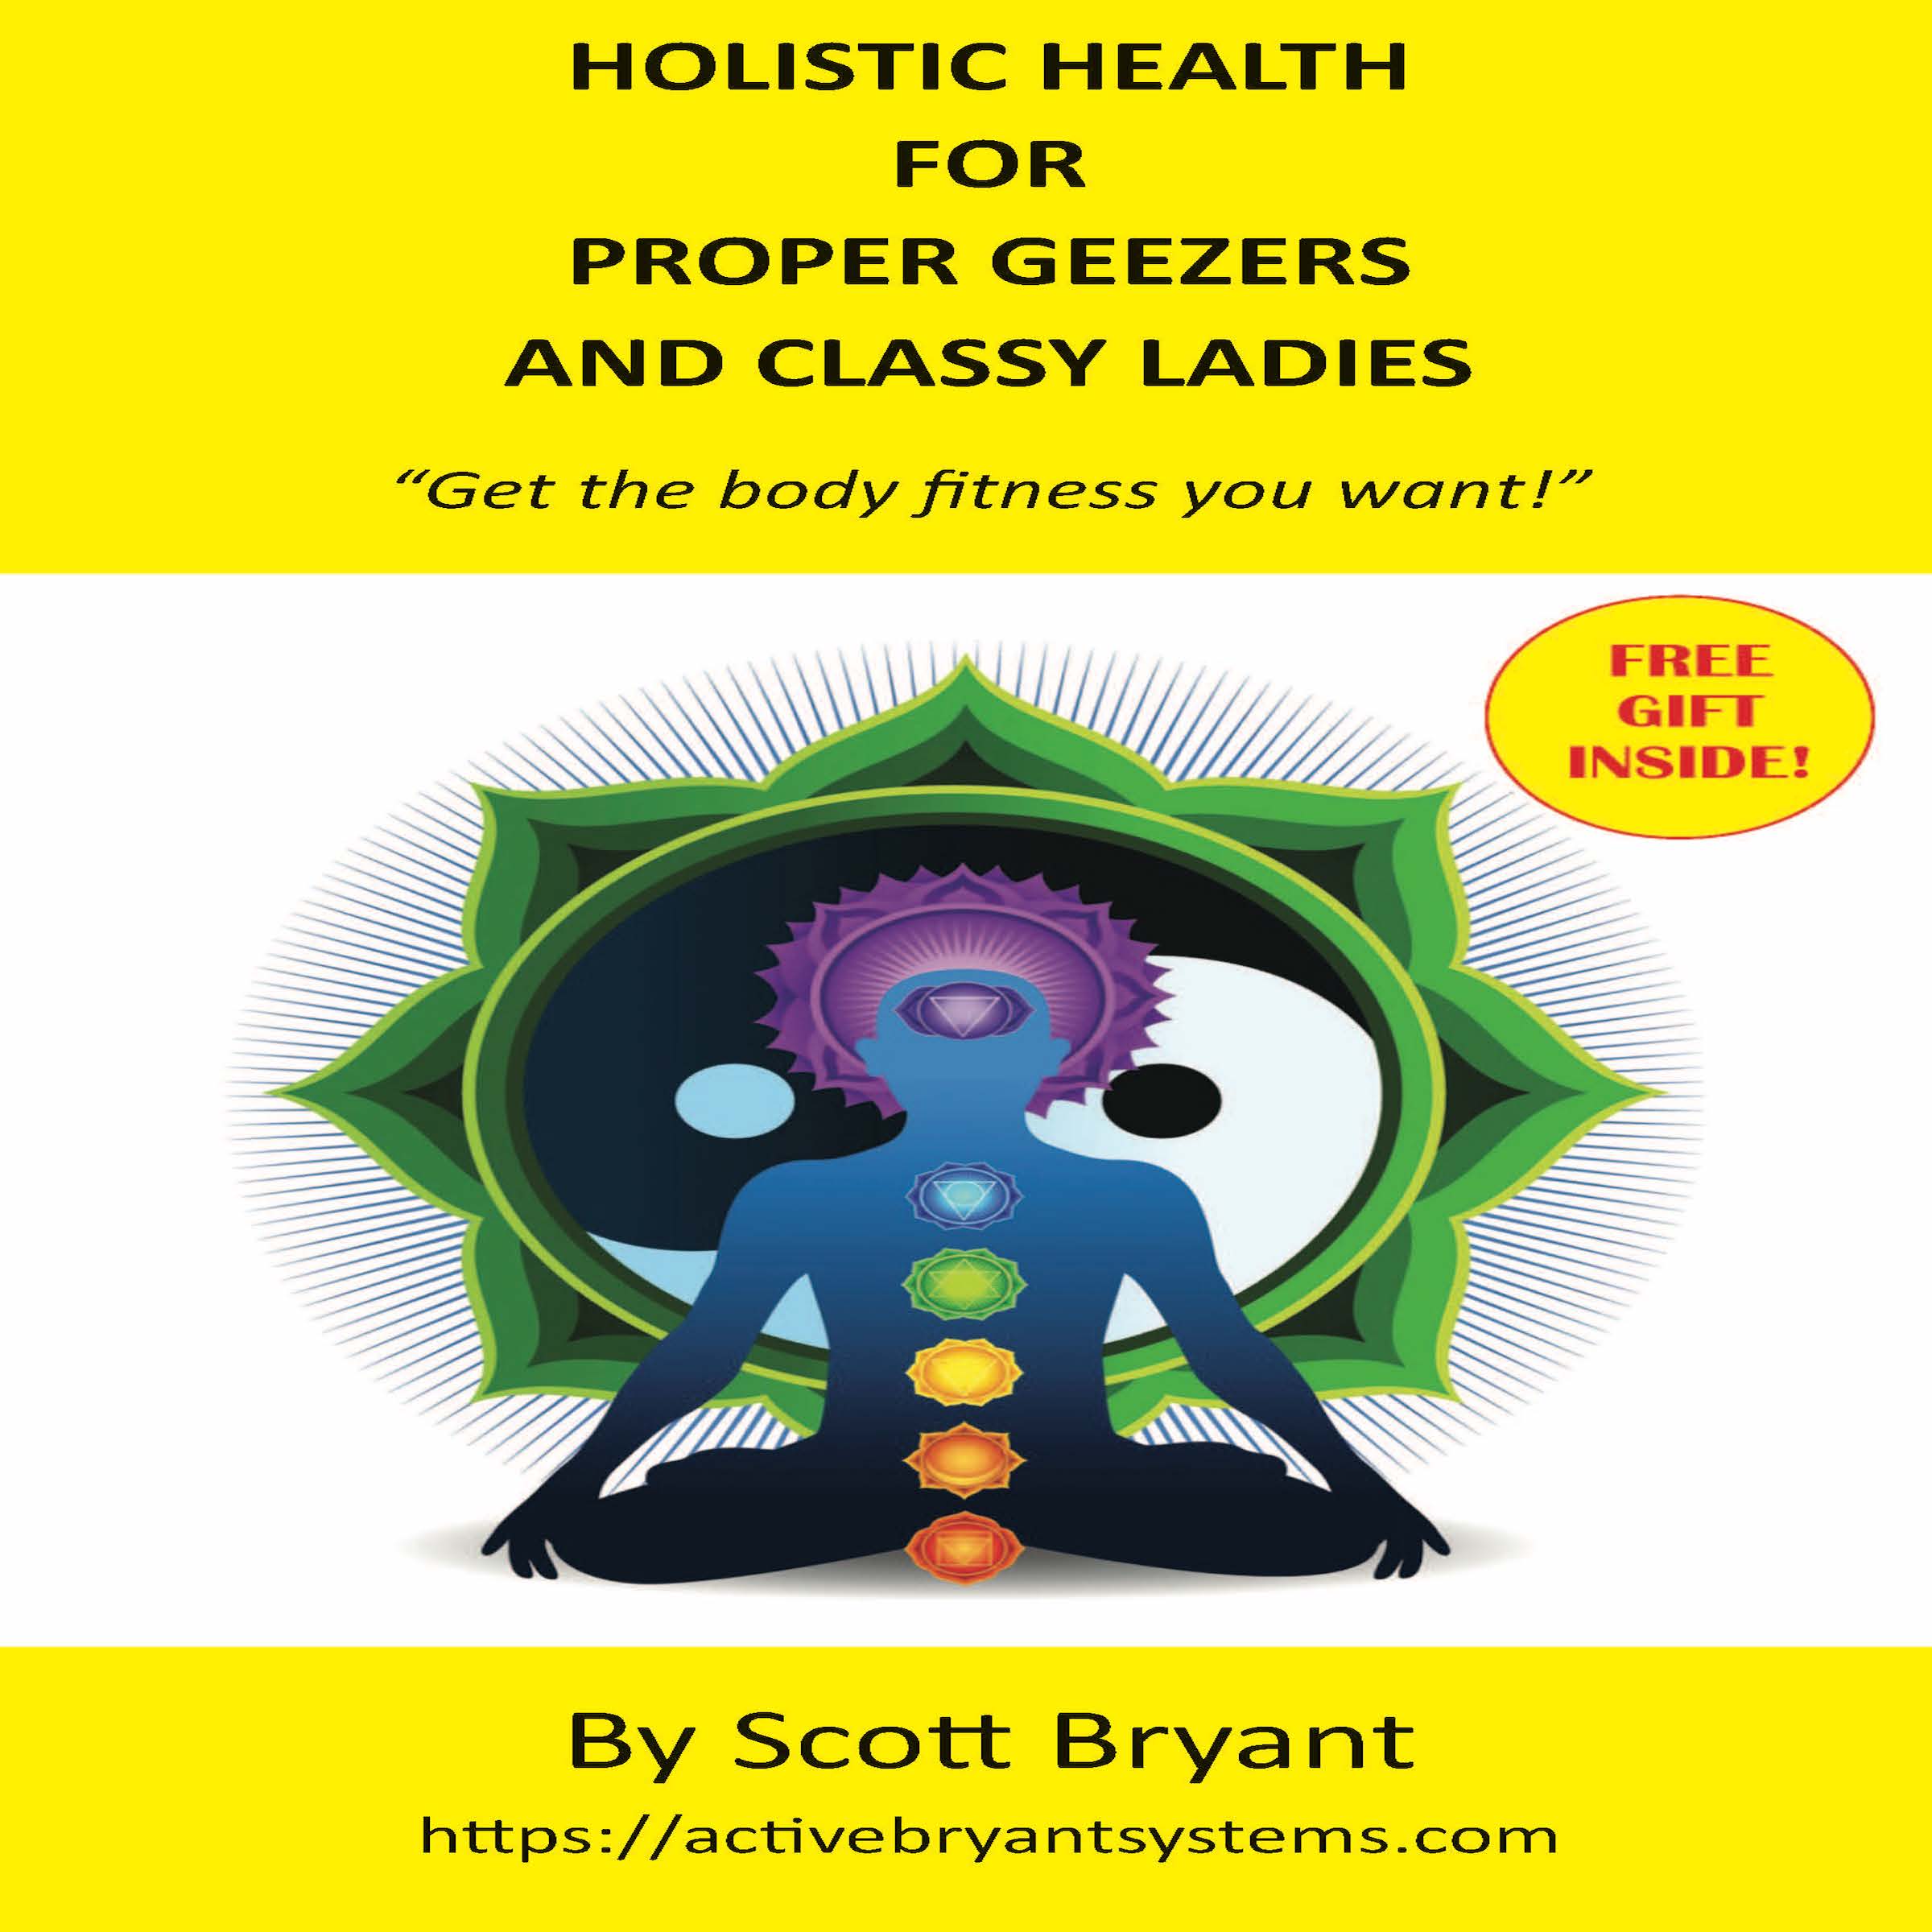 HOLISTIC HEALTH for Proper Geezers and Classy Ladies: Get the body fitness you want!